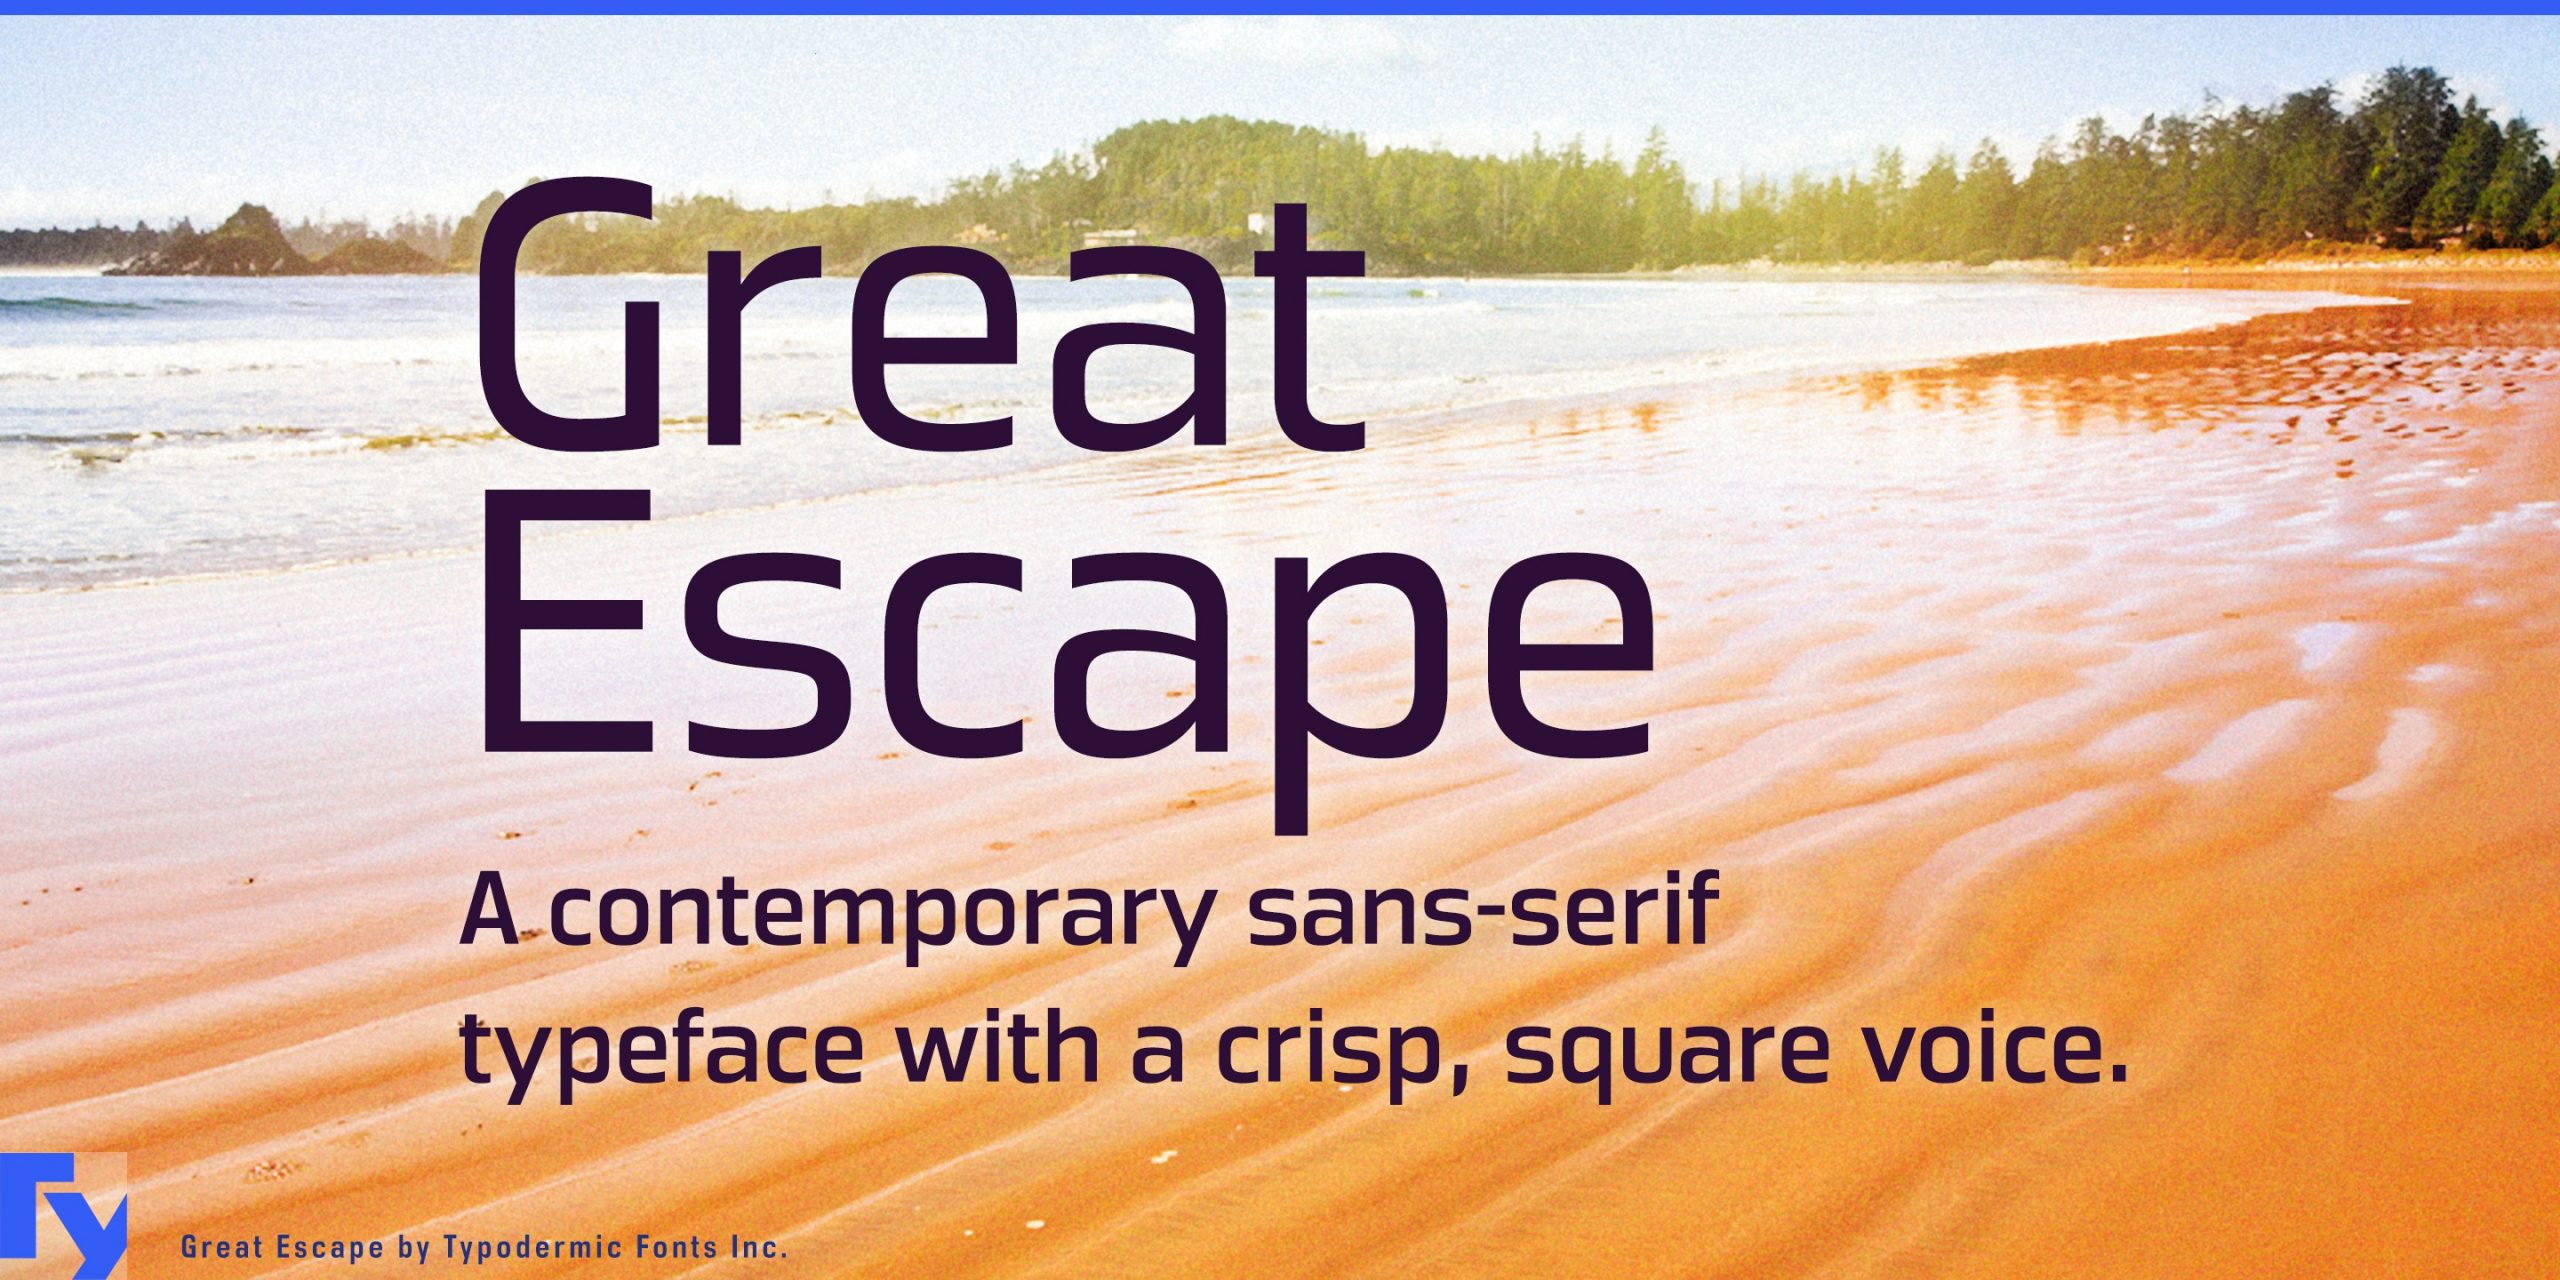 Geometric Elegance: Discover the Modern Twist of Great Escape Typeface